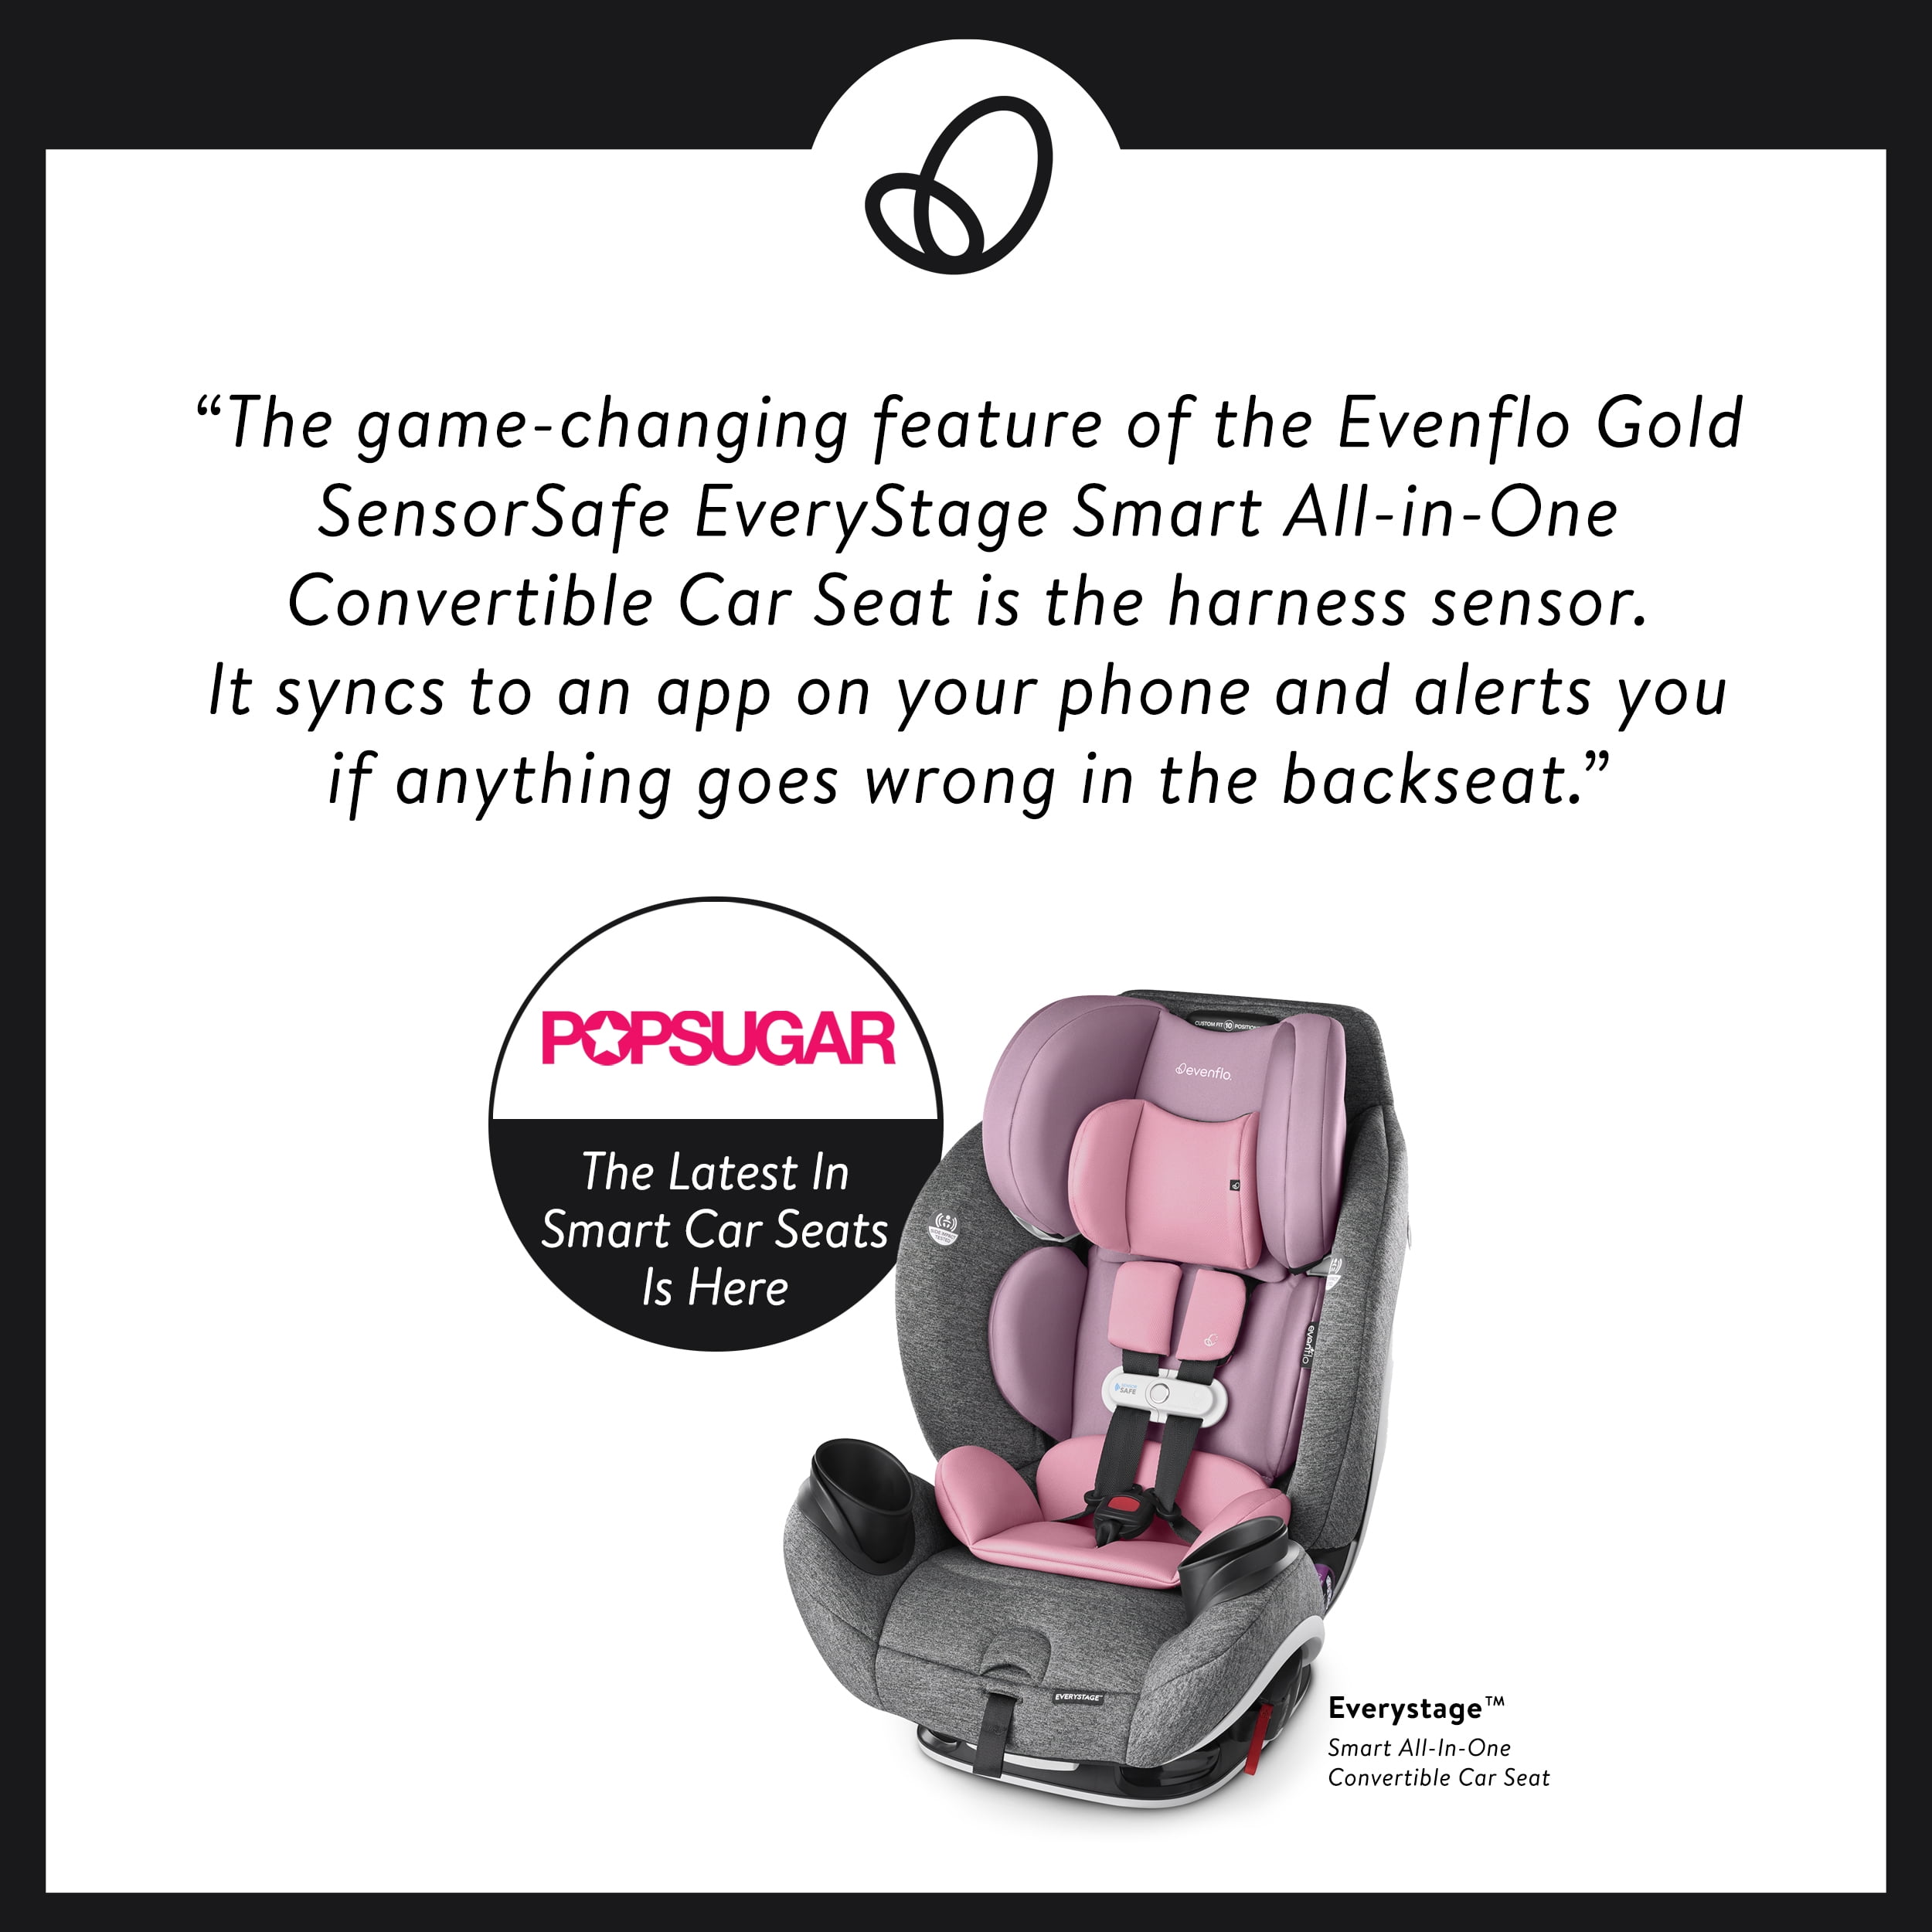 Moonstone Evenflo Gold SensorSafe EveryStage Smart All-in-One Convertible Car Seat 